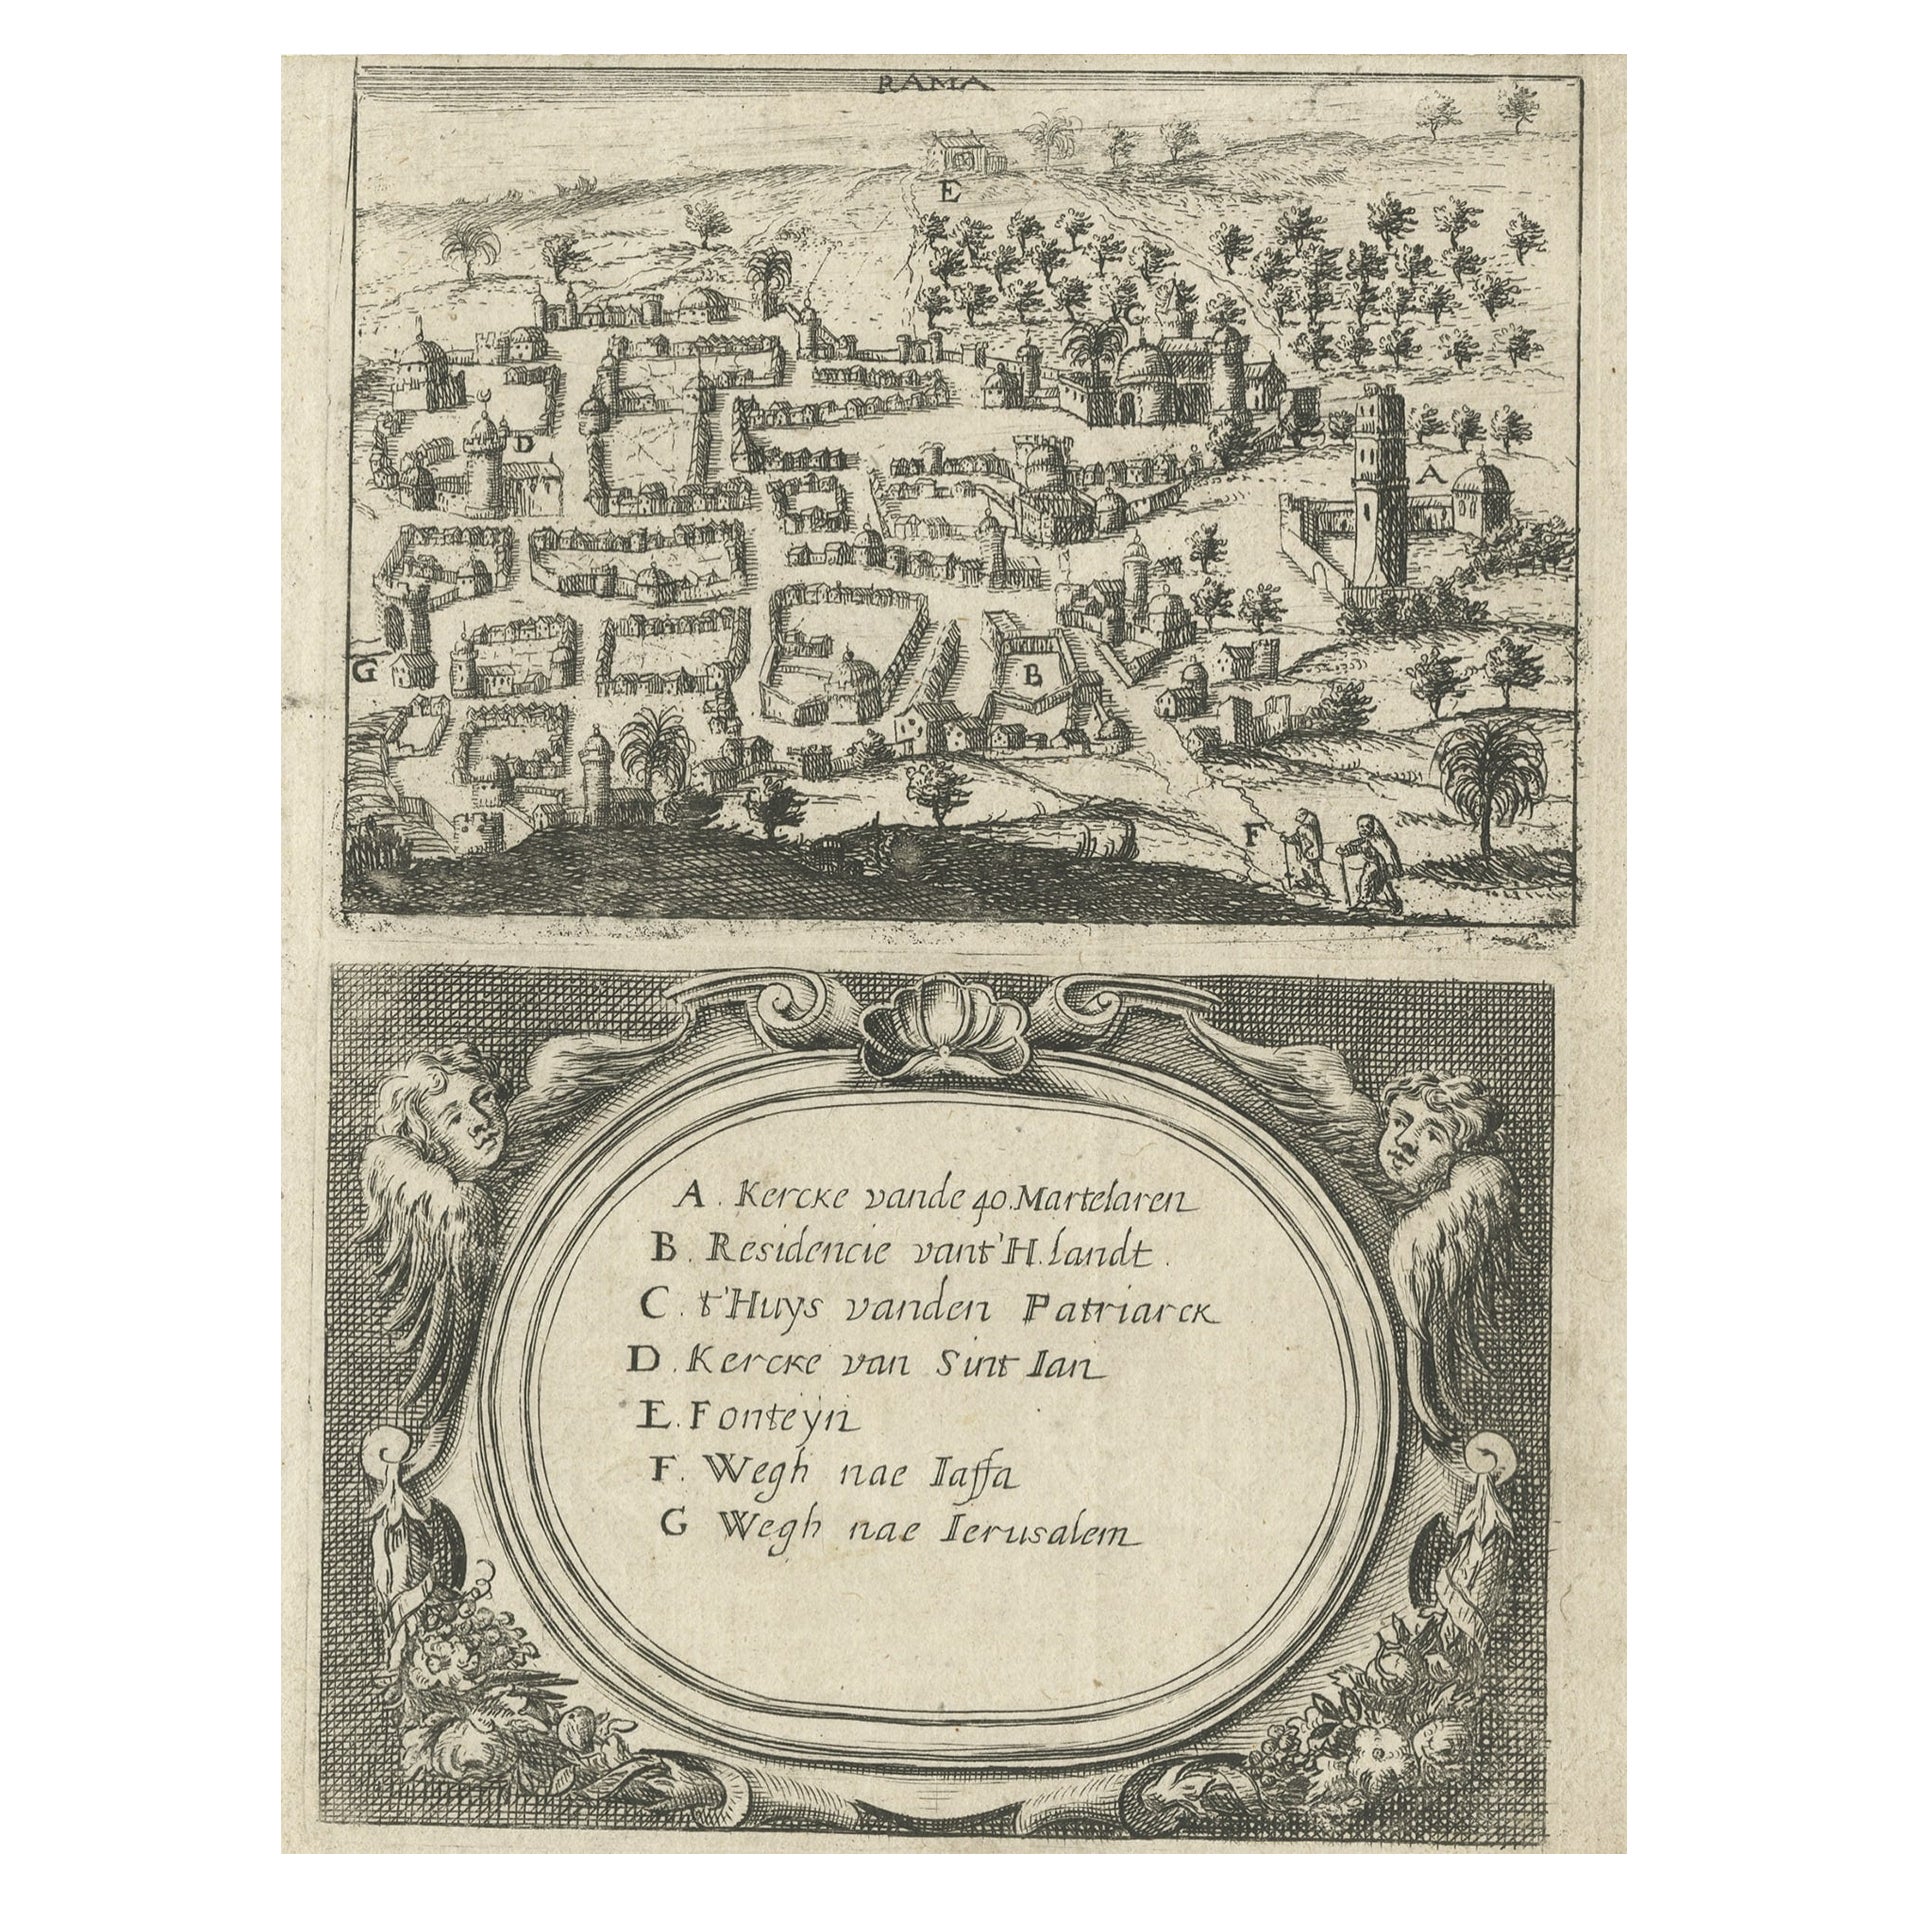 Rare Map of Rama or Ramma 'Ramallah?' in Palestine or the Holy Land, ca.1730